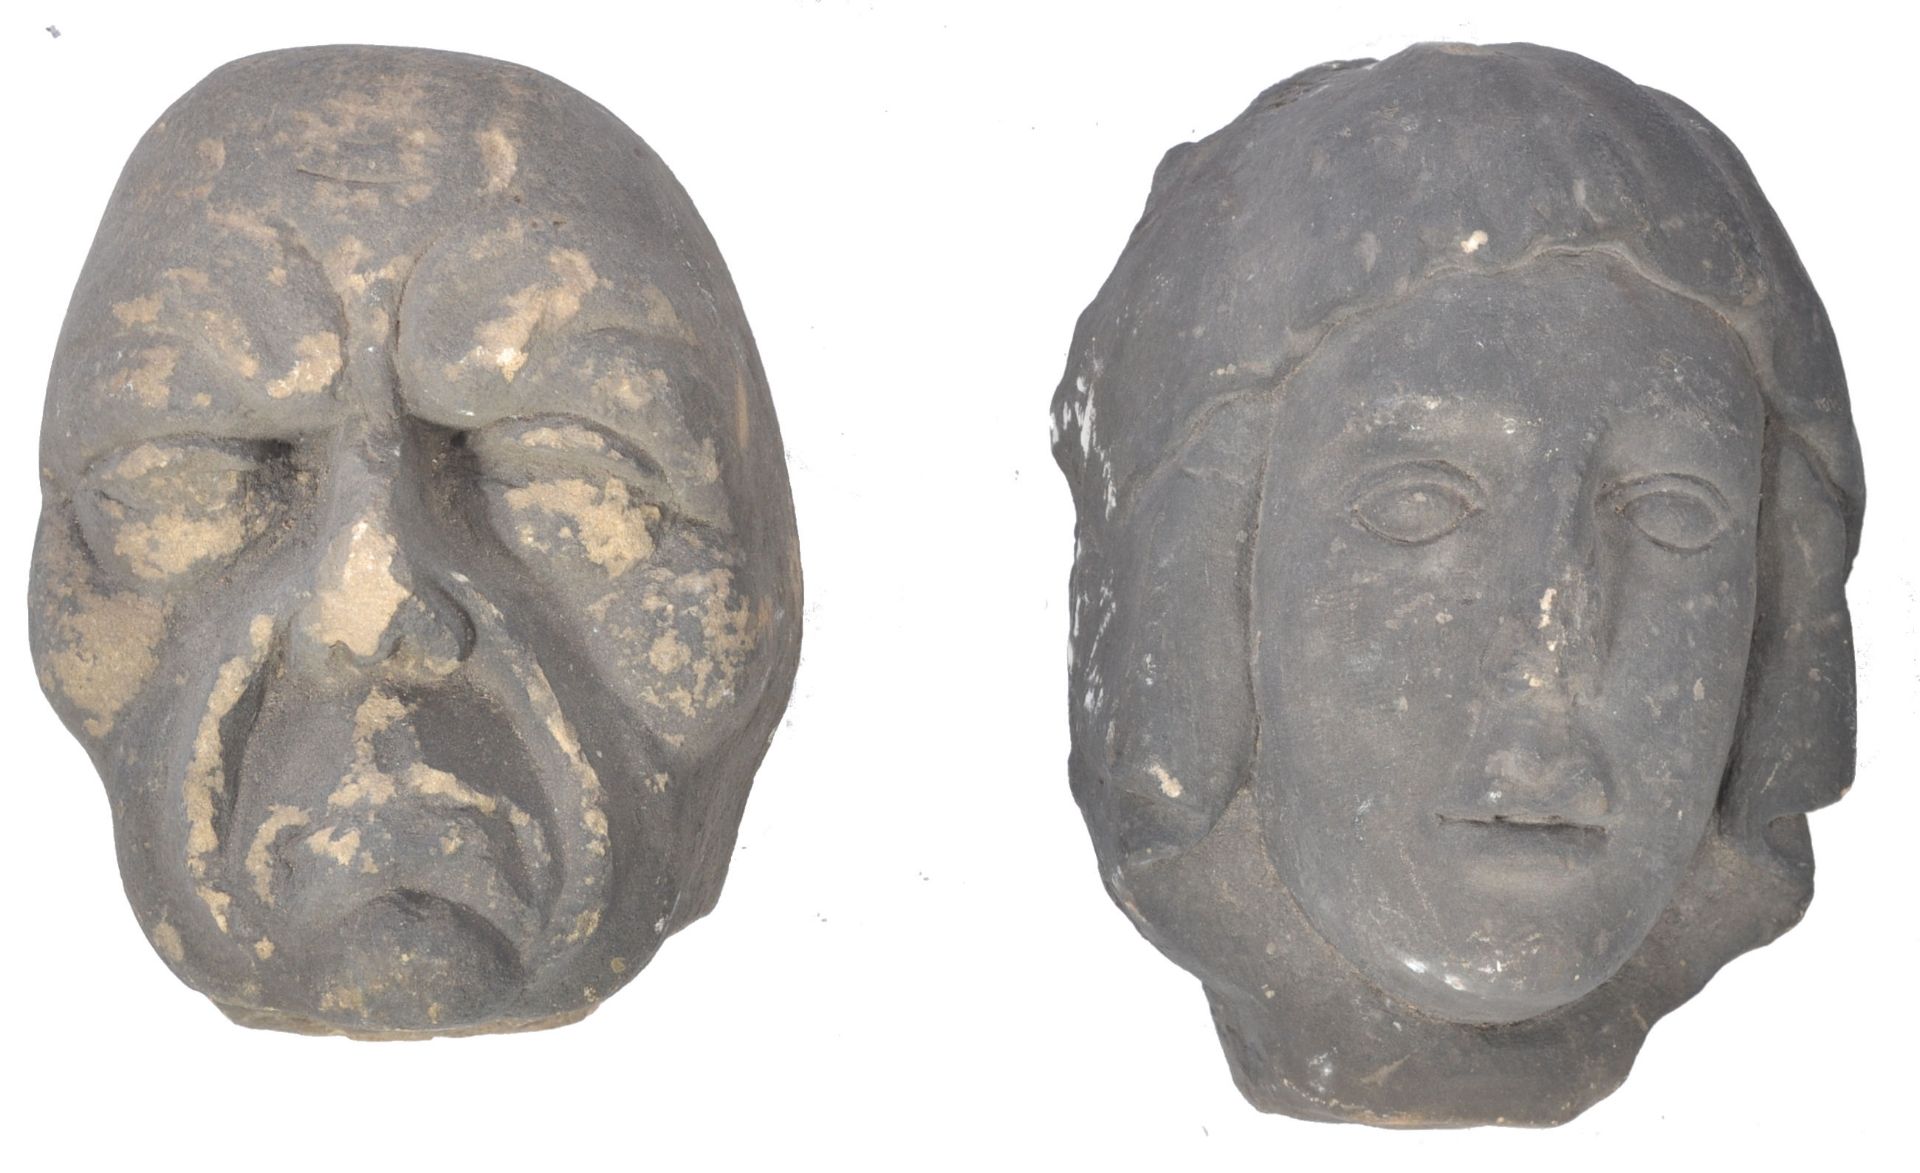 A PAIR OF EARLY CARVED STONE MEDIEVAL CARVED HEADS - CAUBLES